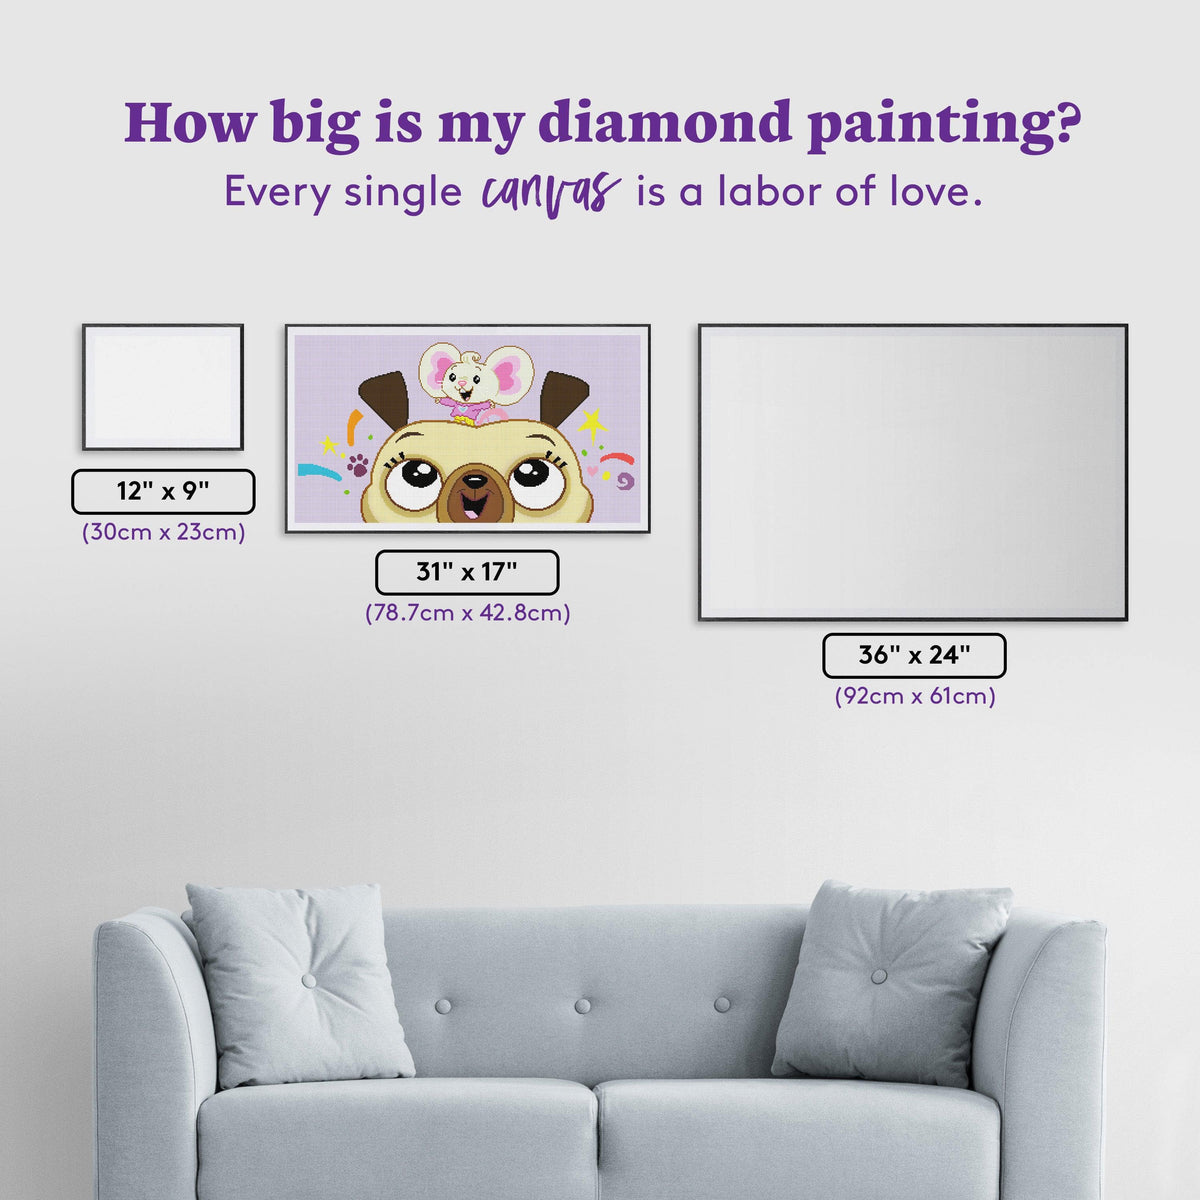 Diamond Painting Chip and Potato 31" x 17" (78.7cm x 42.8cm) / Square with 31 Colors including 1 AB Diamonds and 2 Fairy Dust Diamonds / 54,352